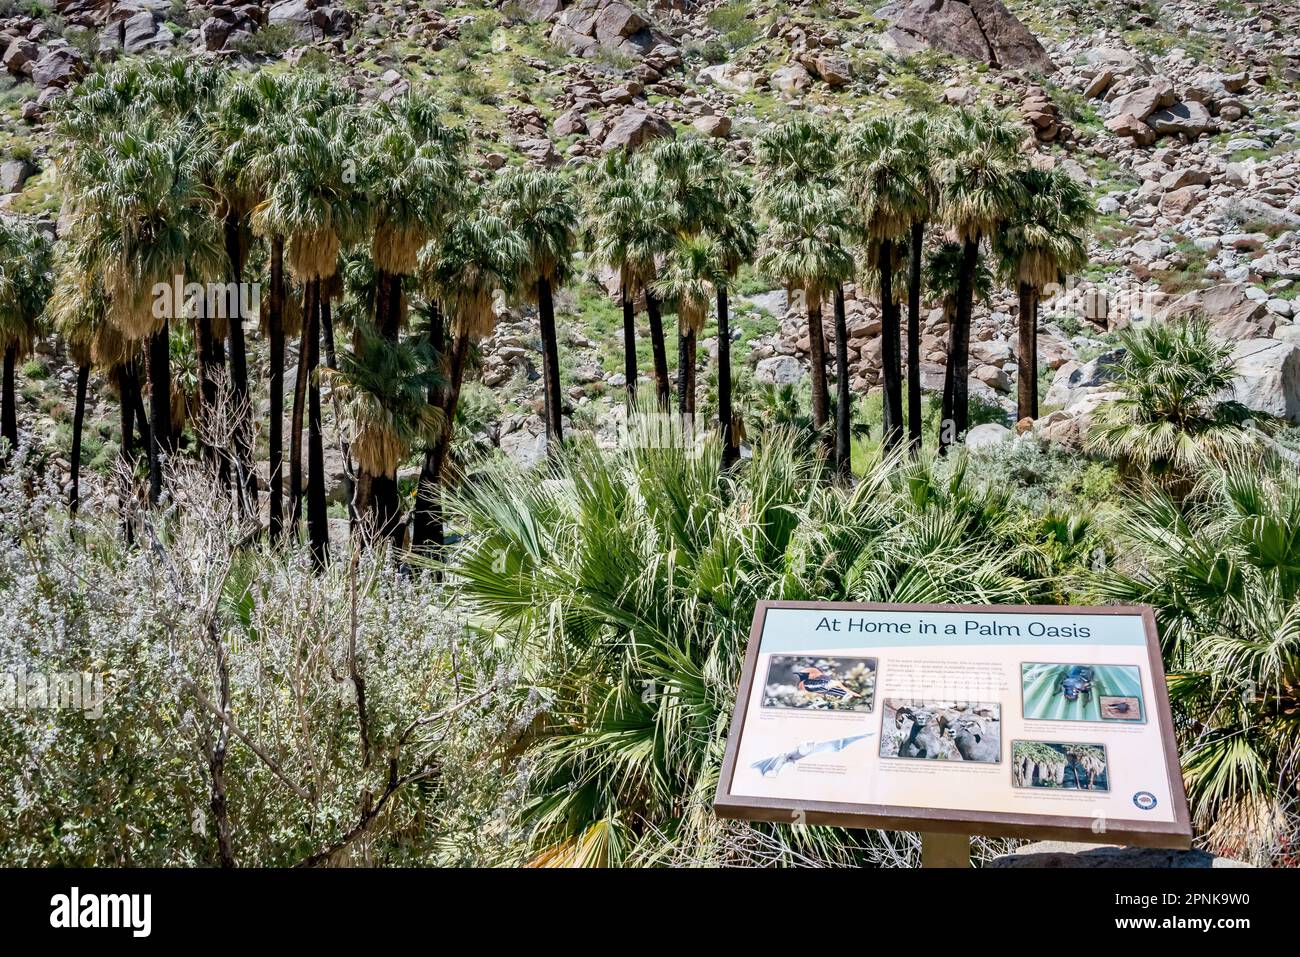 Oasis of native California fan palm trees at Borrego Palm Canyon, with informational sign at overlook, in Anza Borrego Desert State Park, California. Stock Photo